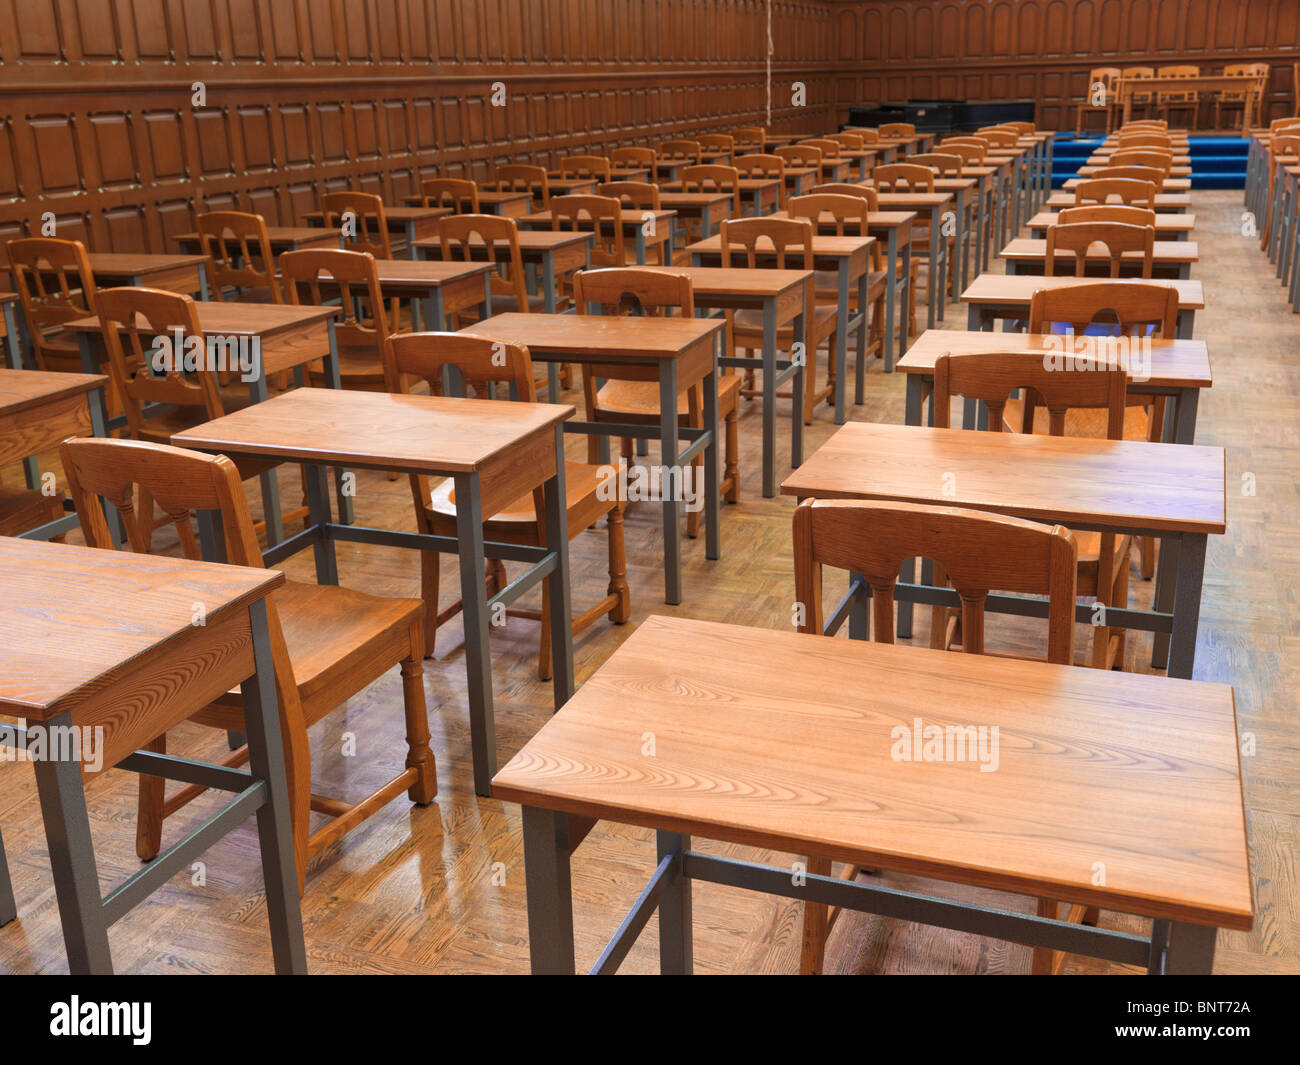 Desks At A Lecture Hall University Of Toronto Canada Stock Photo